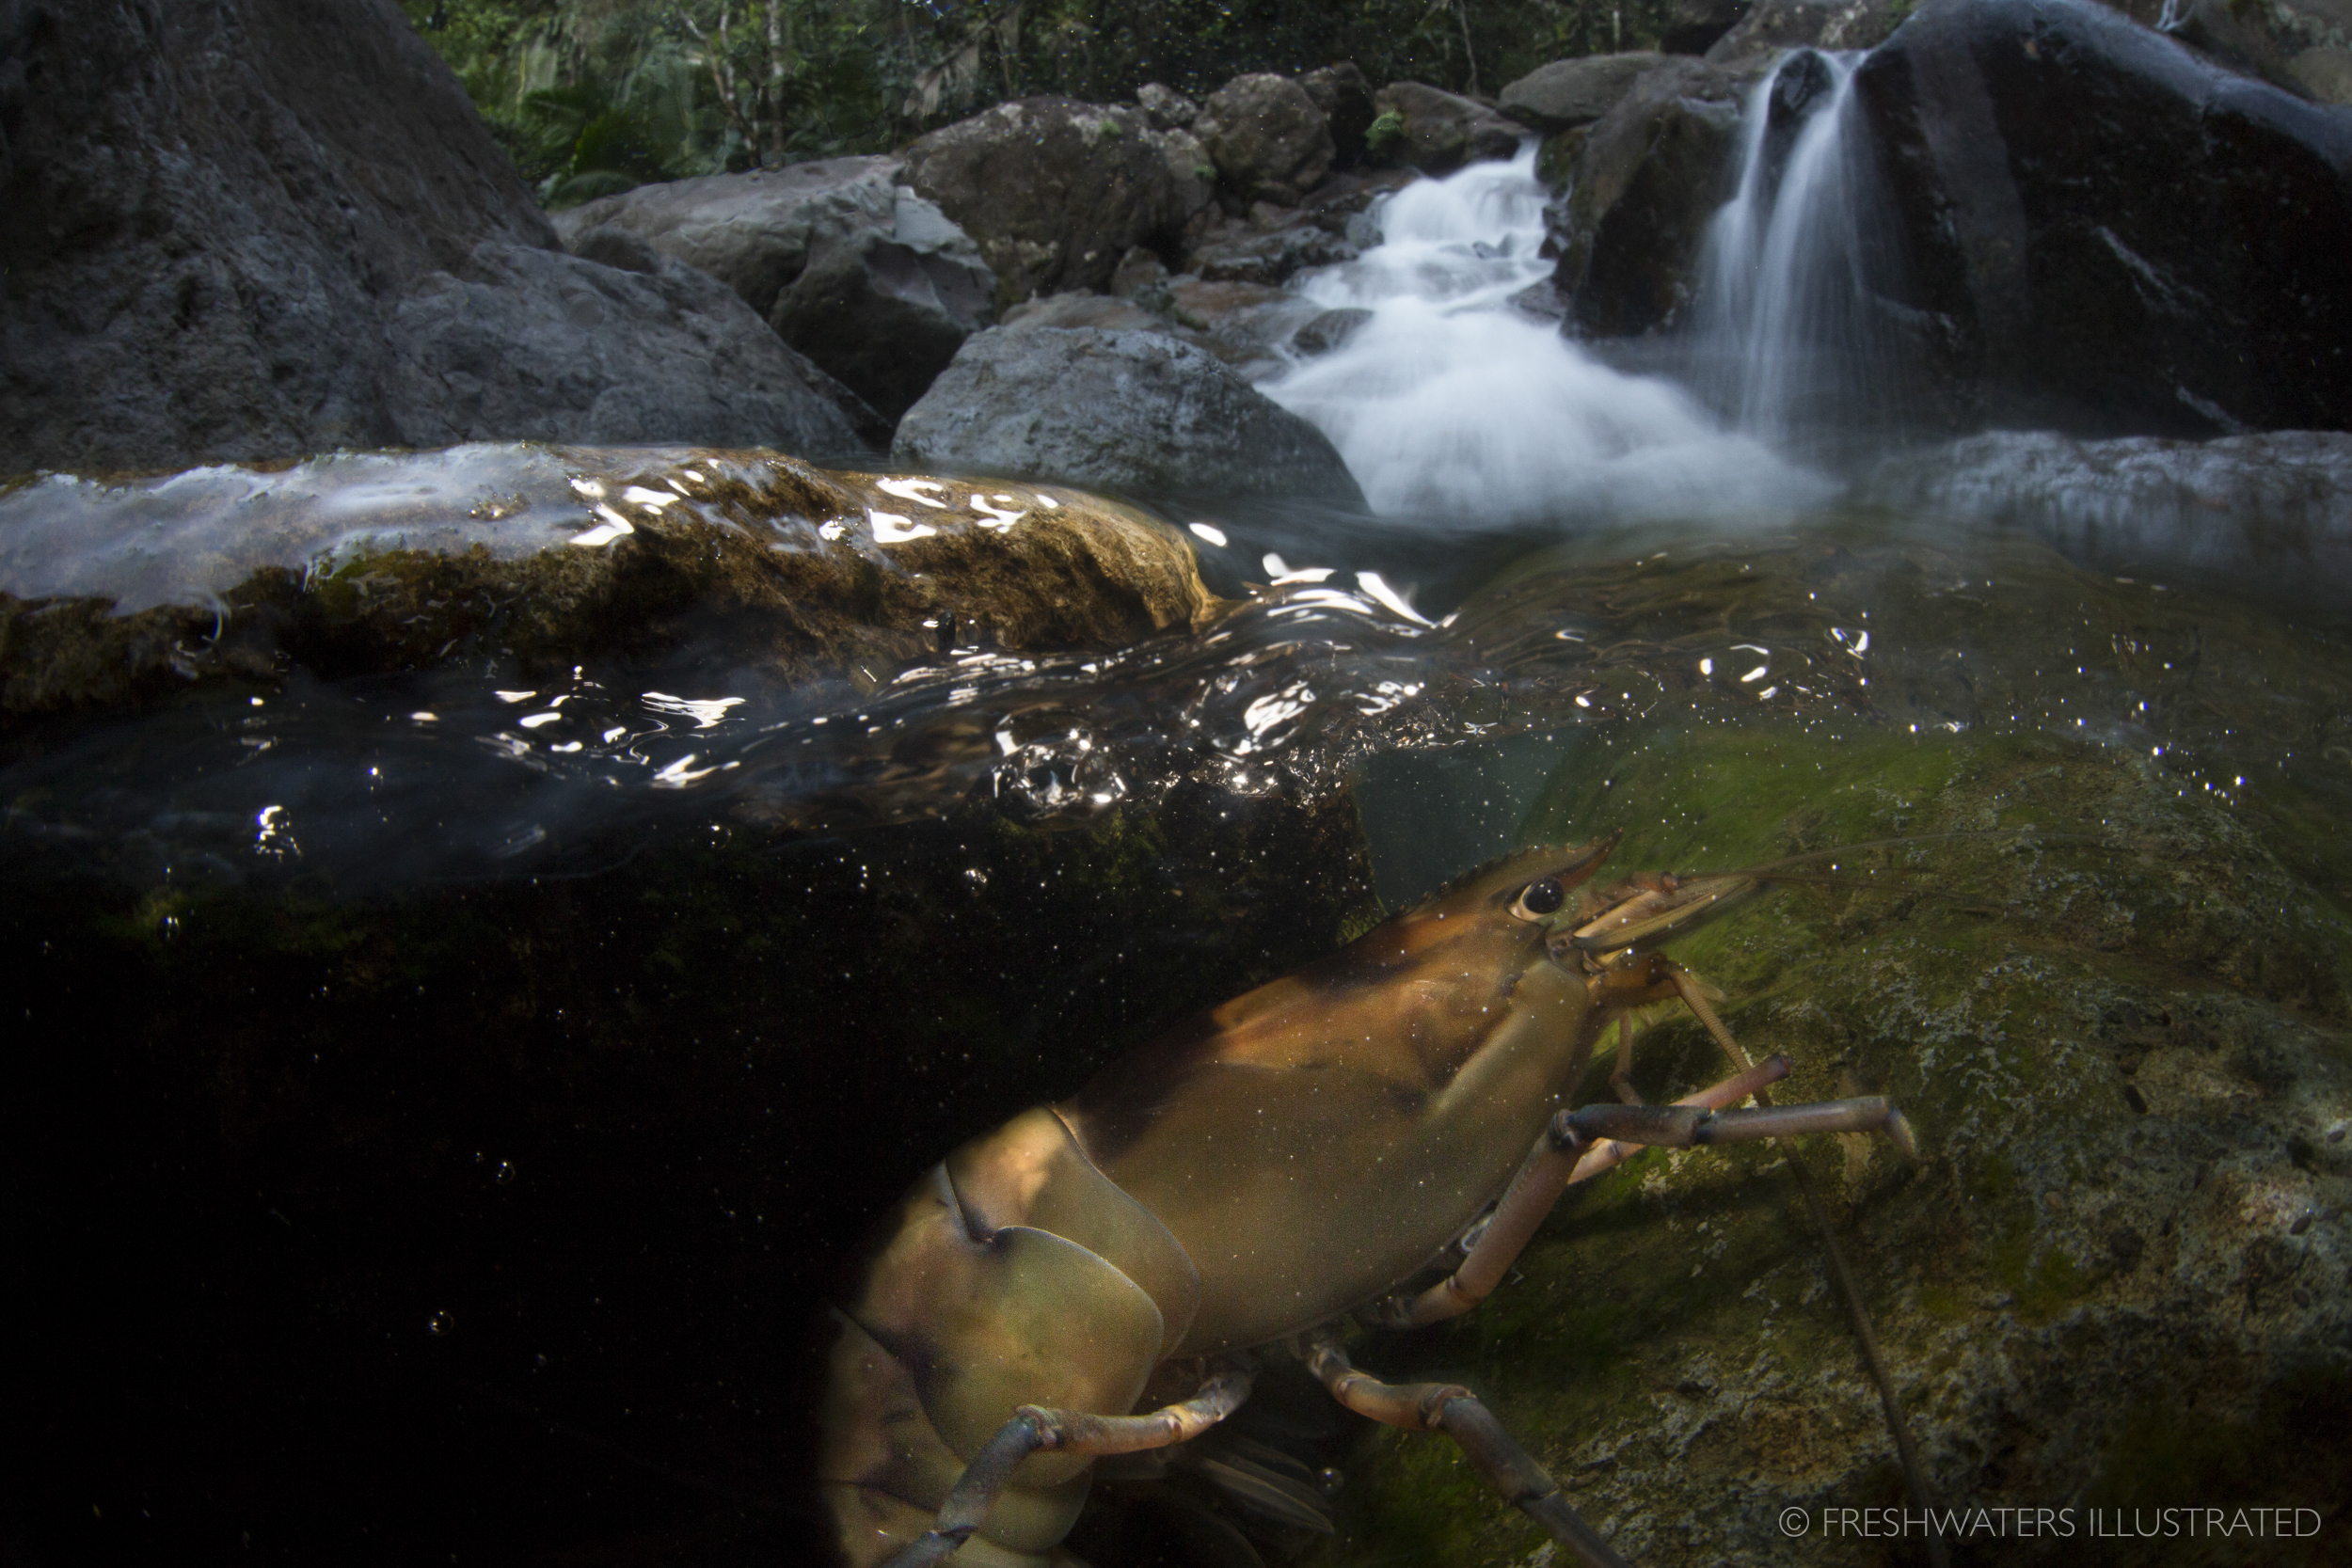  A large freshwater shrimp (Macrobrachium carcinus) precariously navigates up a small cascade in the headwaters of Puerto Rico's El Yunque National Forest. El Yunque NationalForest, Puerto Rico  www.FreshwatersIllustrated.org  